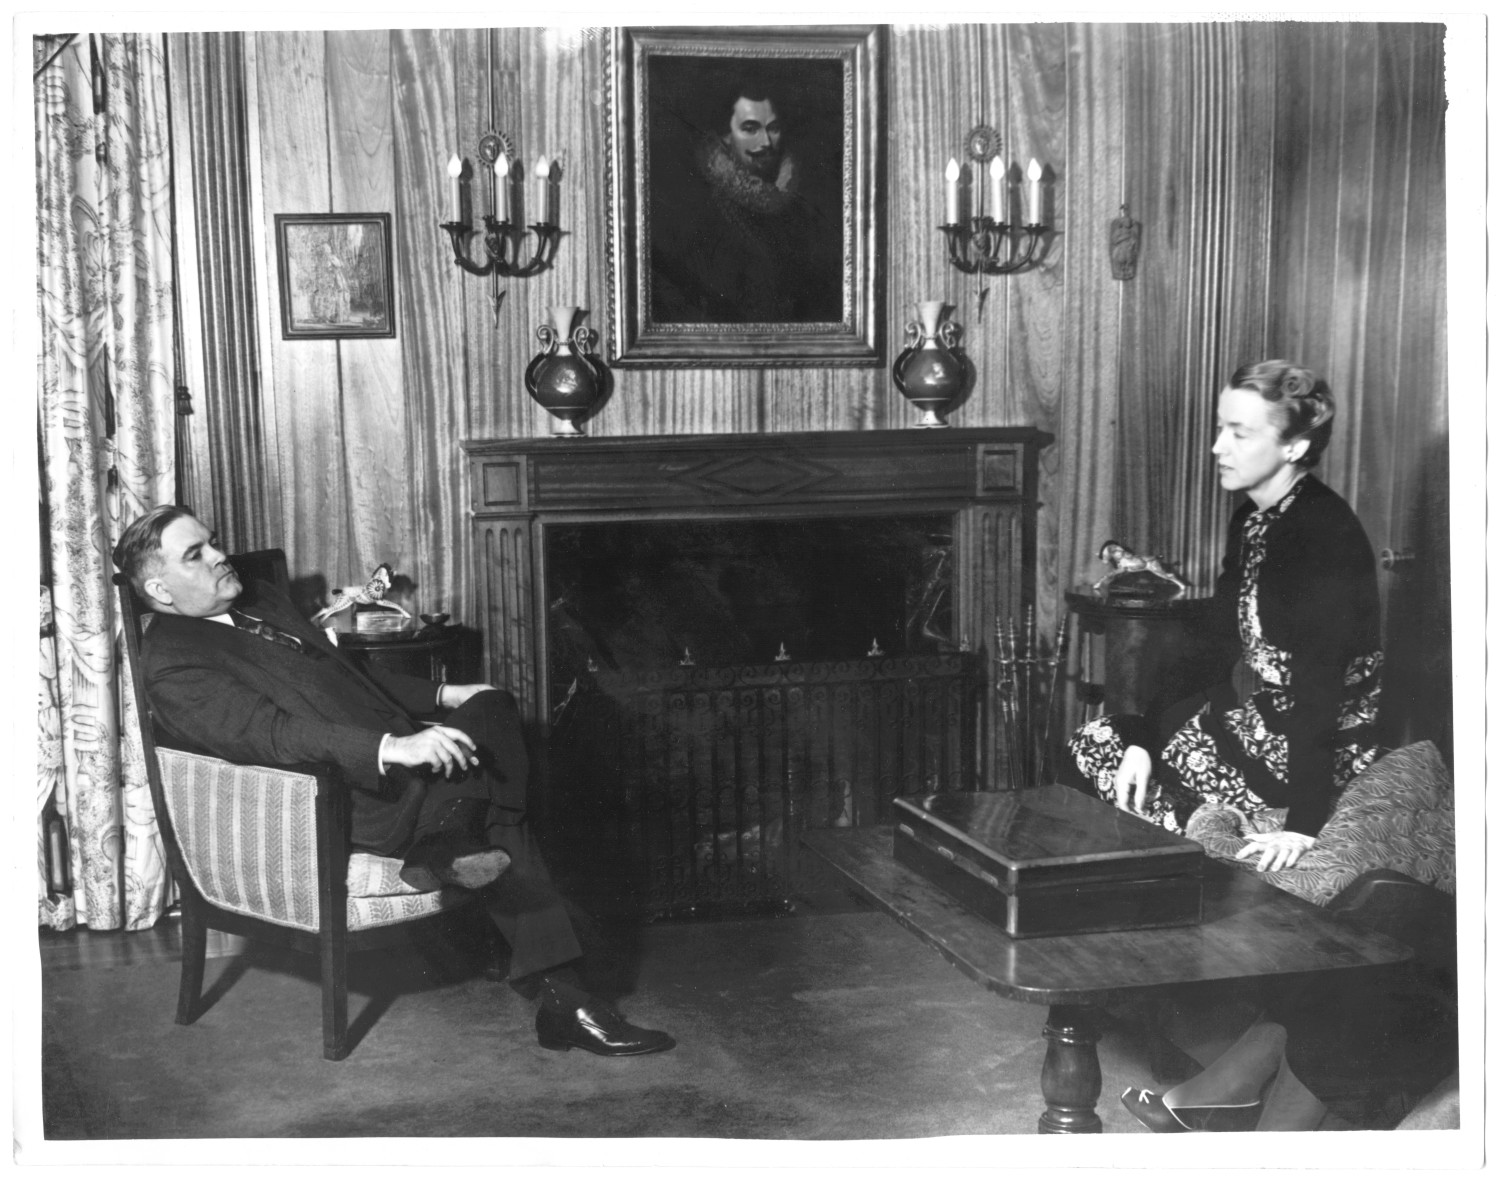 [George A. Hill, Jr. and Mary Hill with fireplace in background]
                                                
                                                    [Sequence #]: 1 of 1
                                                